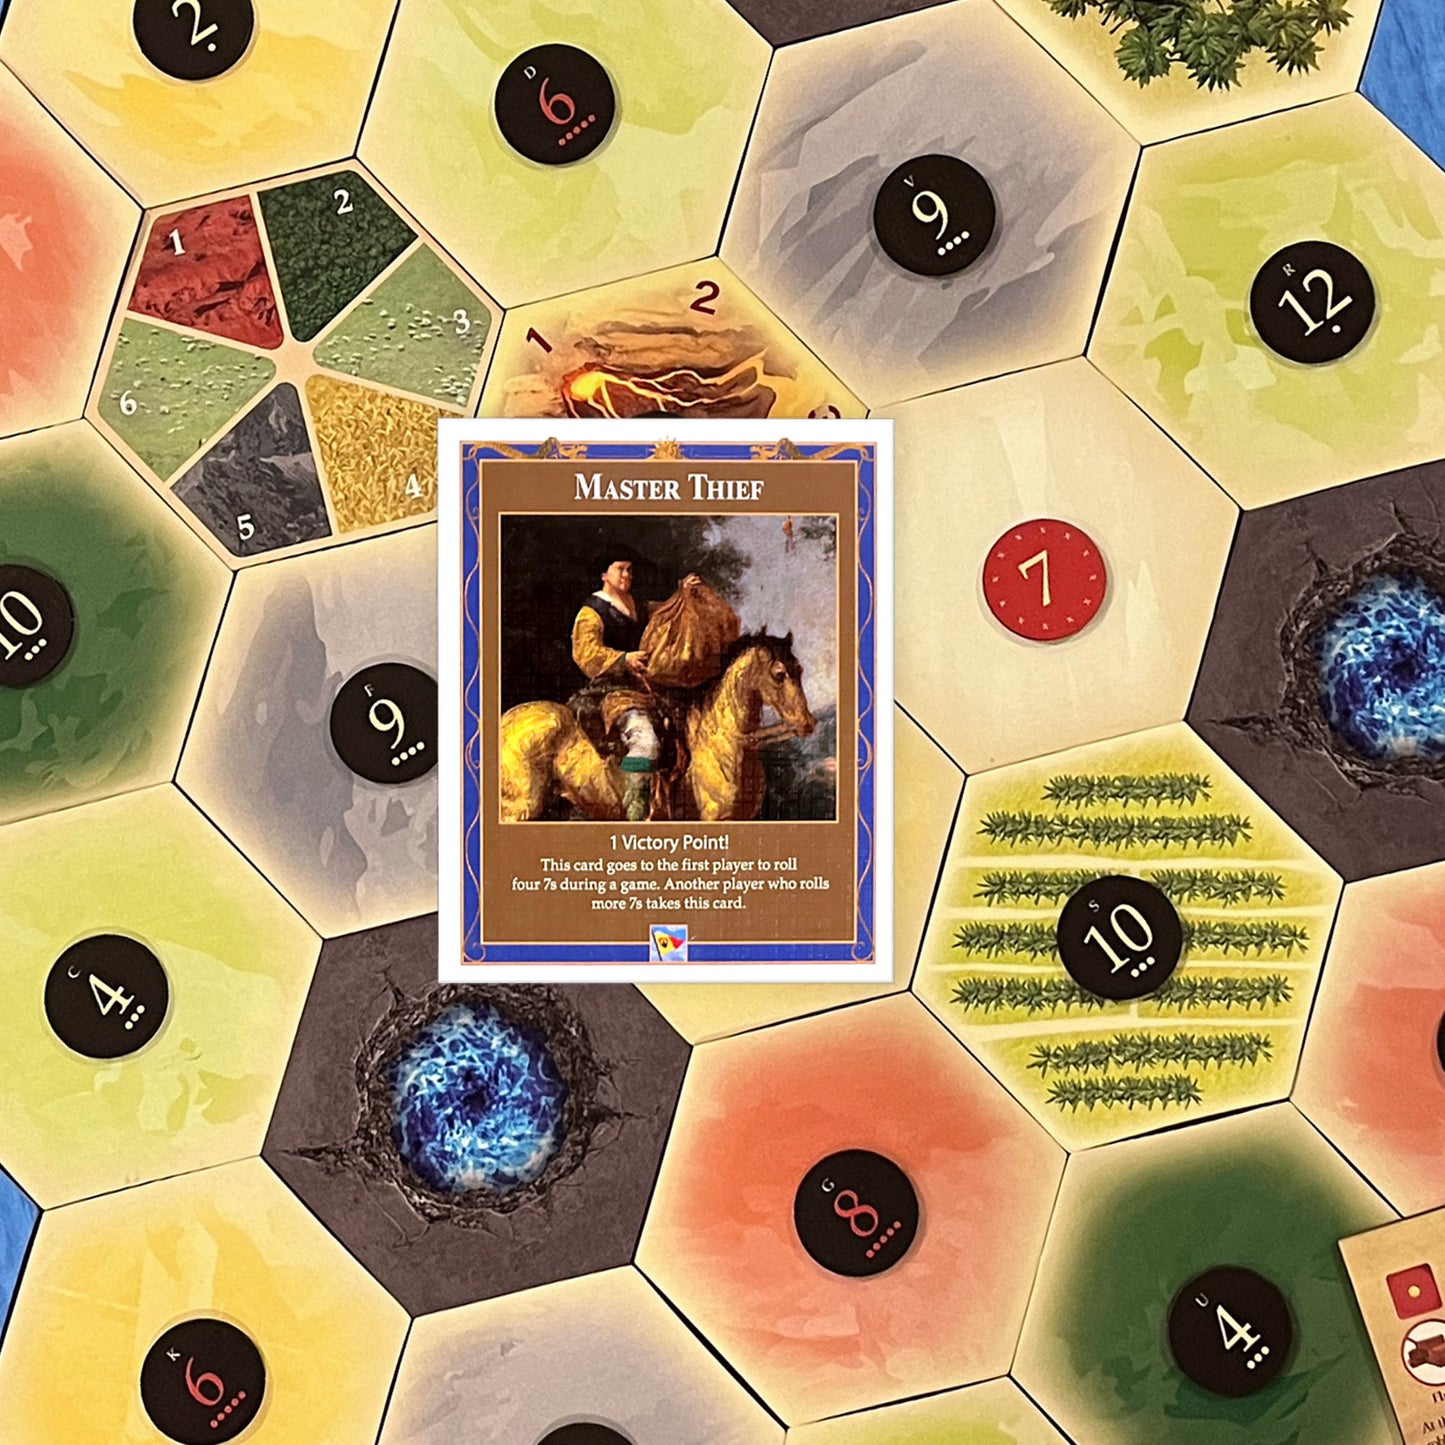 Master Thief Card compatible with Catan's Settlers of Catan (4th Edition), Seafarers, and Catan Expansions, 4th Edition